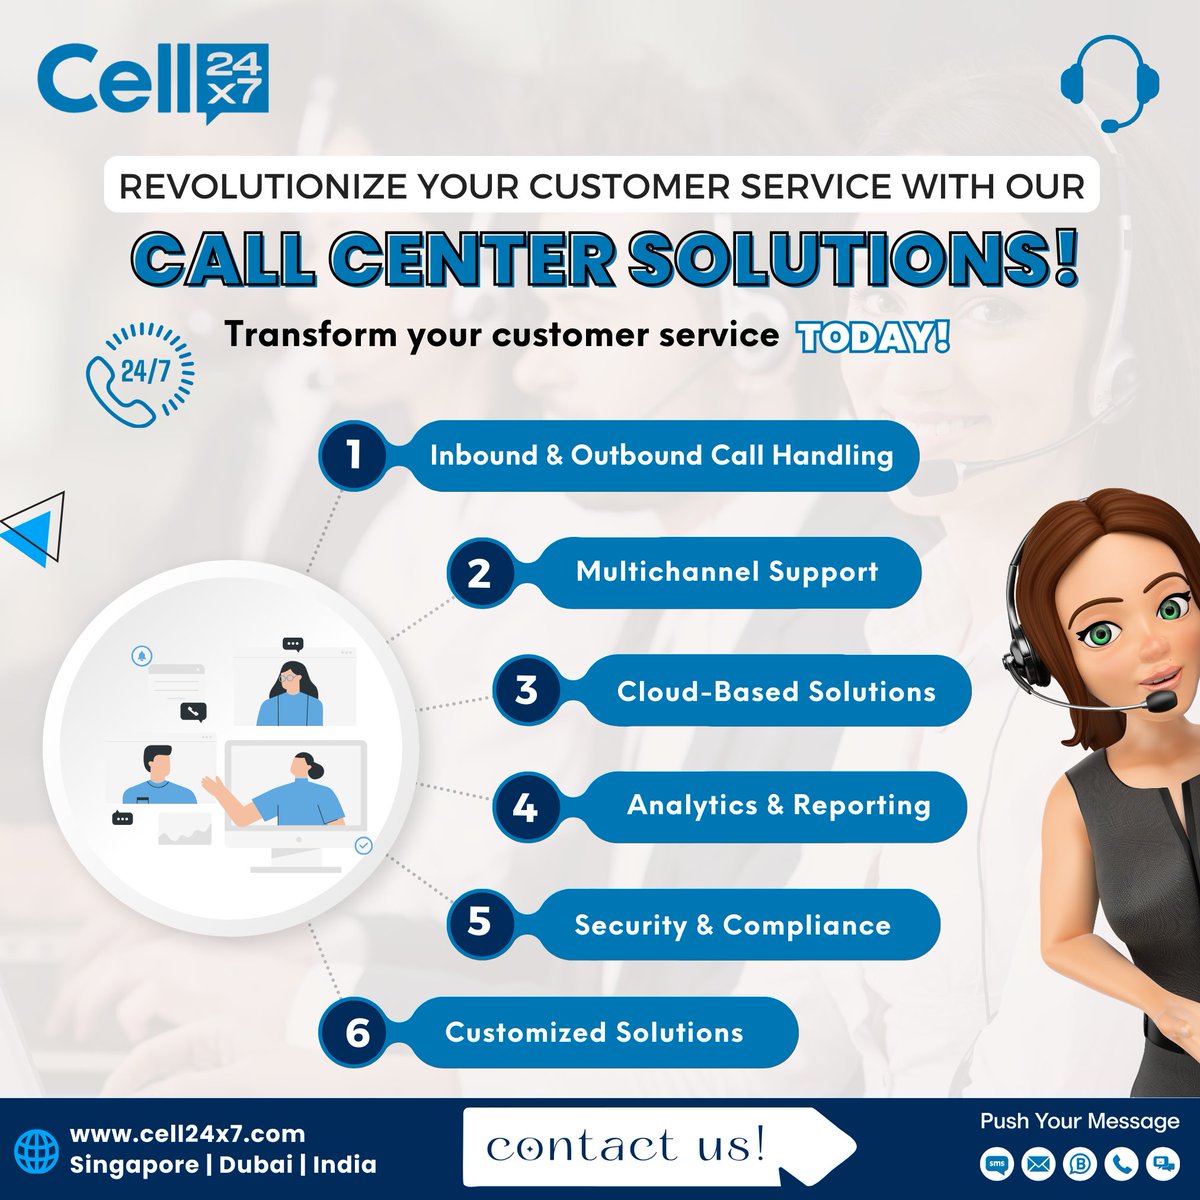 Empower your business with seamless customer interactions and superior support! 

#CallCenterSolutions #CustomerService #InboundCalls #OutboundCalls #CloudSolutions #Analytics #Cell24x7